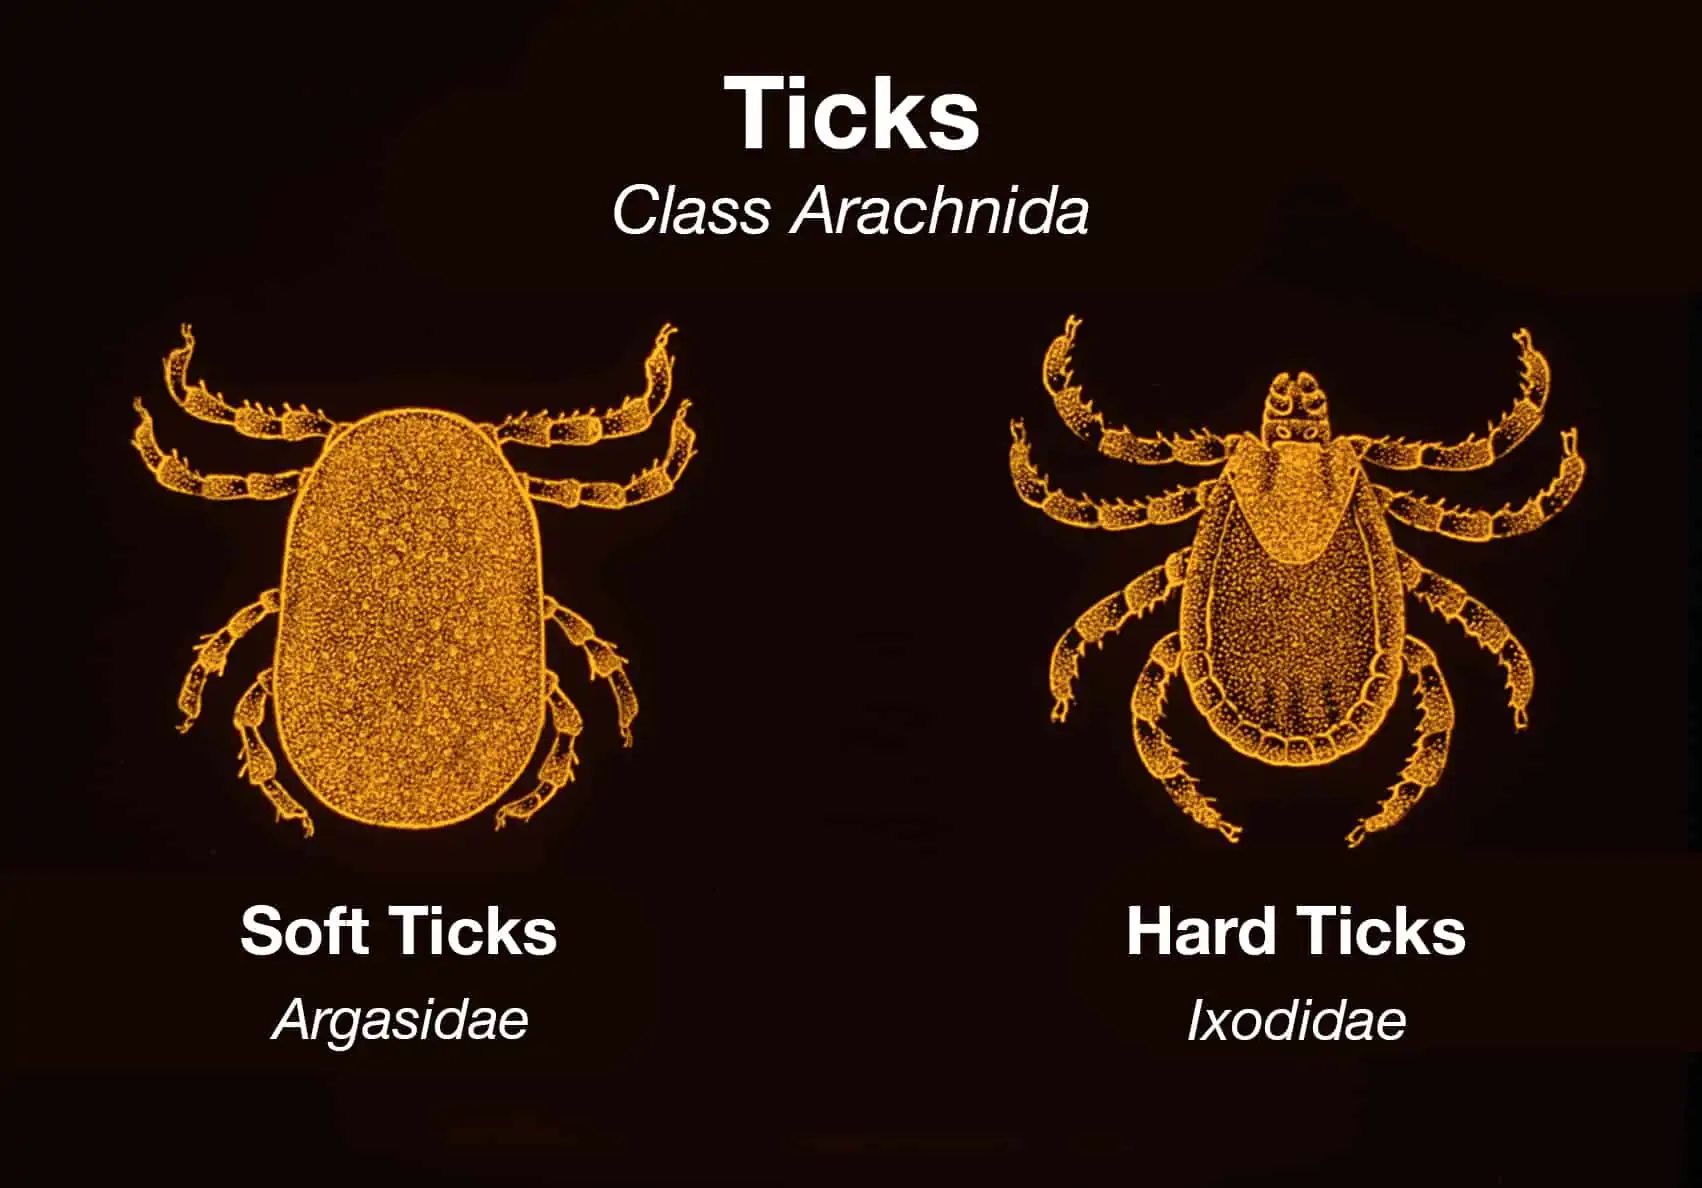 Difference Between Soft &amp; Hard Ticks Who Carry Lyme Disease